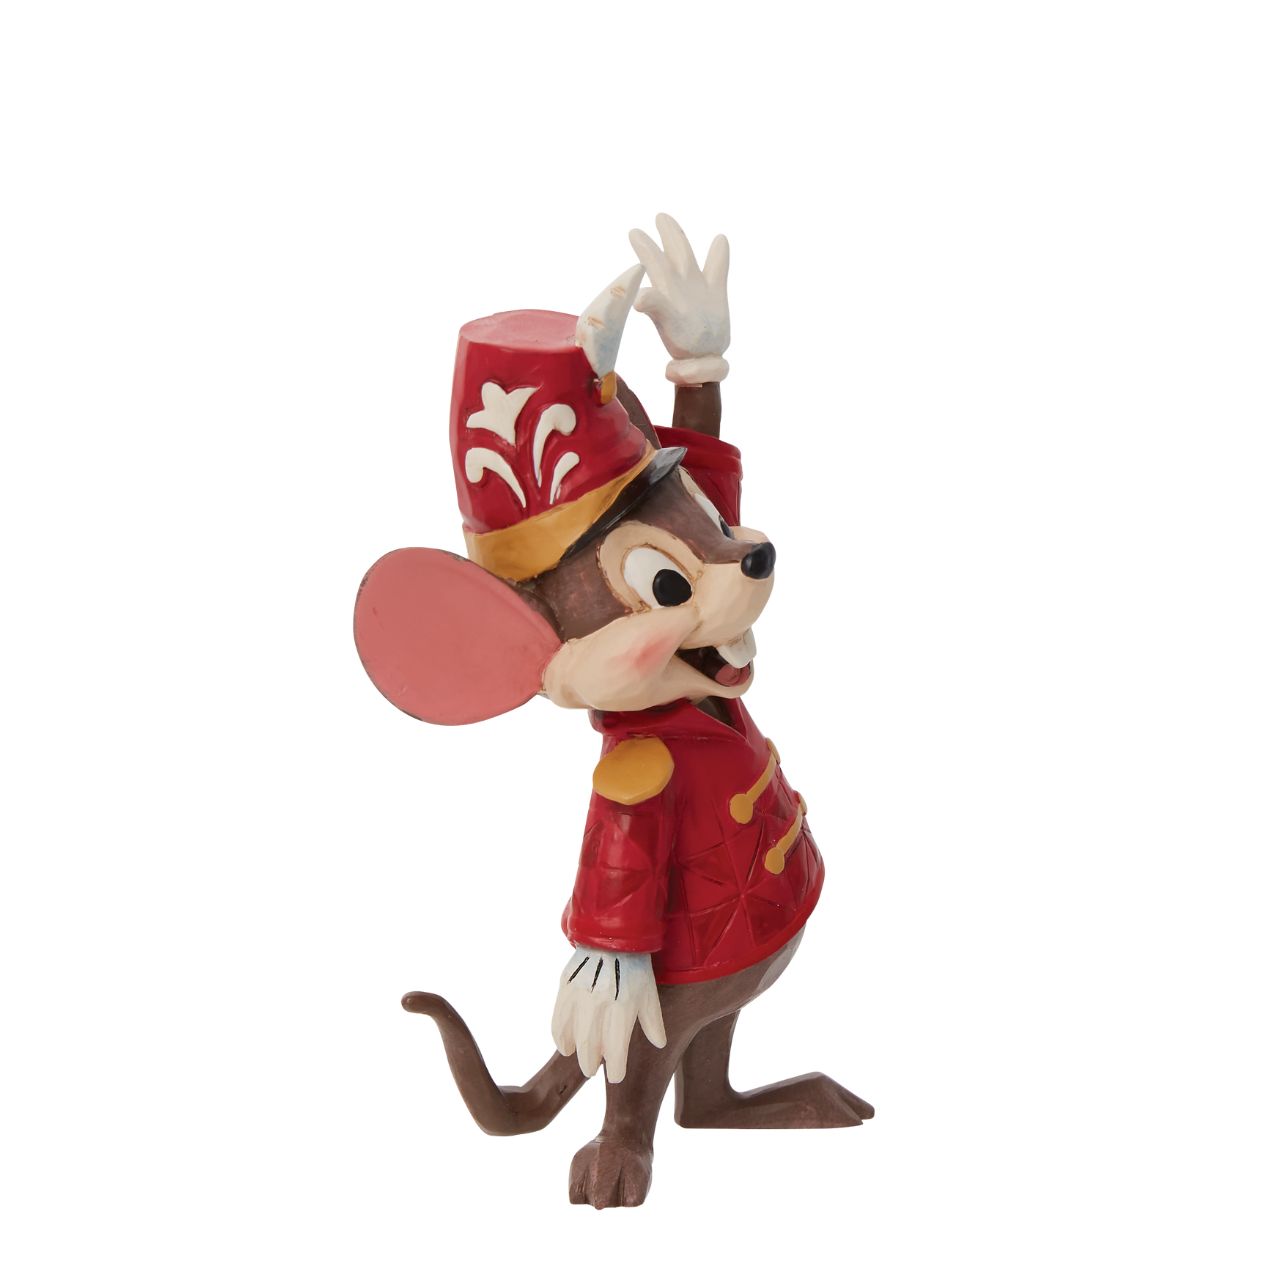 Disney Timothy Mouse Mini Figurine  Timothy Q. Mouse is the beloved guardian and mentor of Dumbo, the flying elephant, from Disney's 1941 animated feature film. With a heavy Brooklyn accent and chipper disposition, Timothy waves in this dashing miniature by Jim Shore.